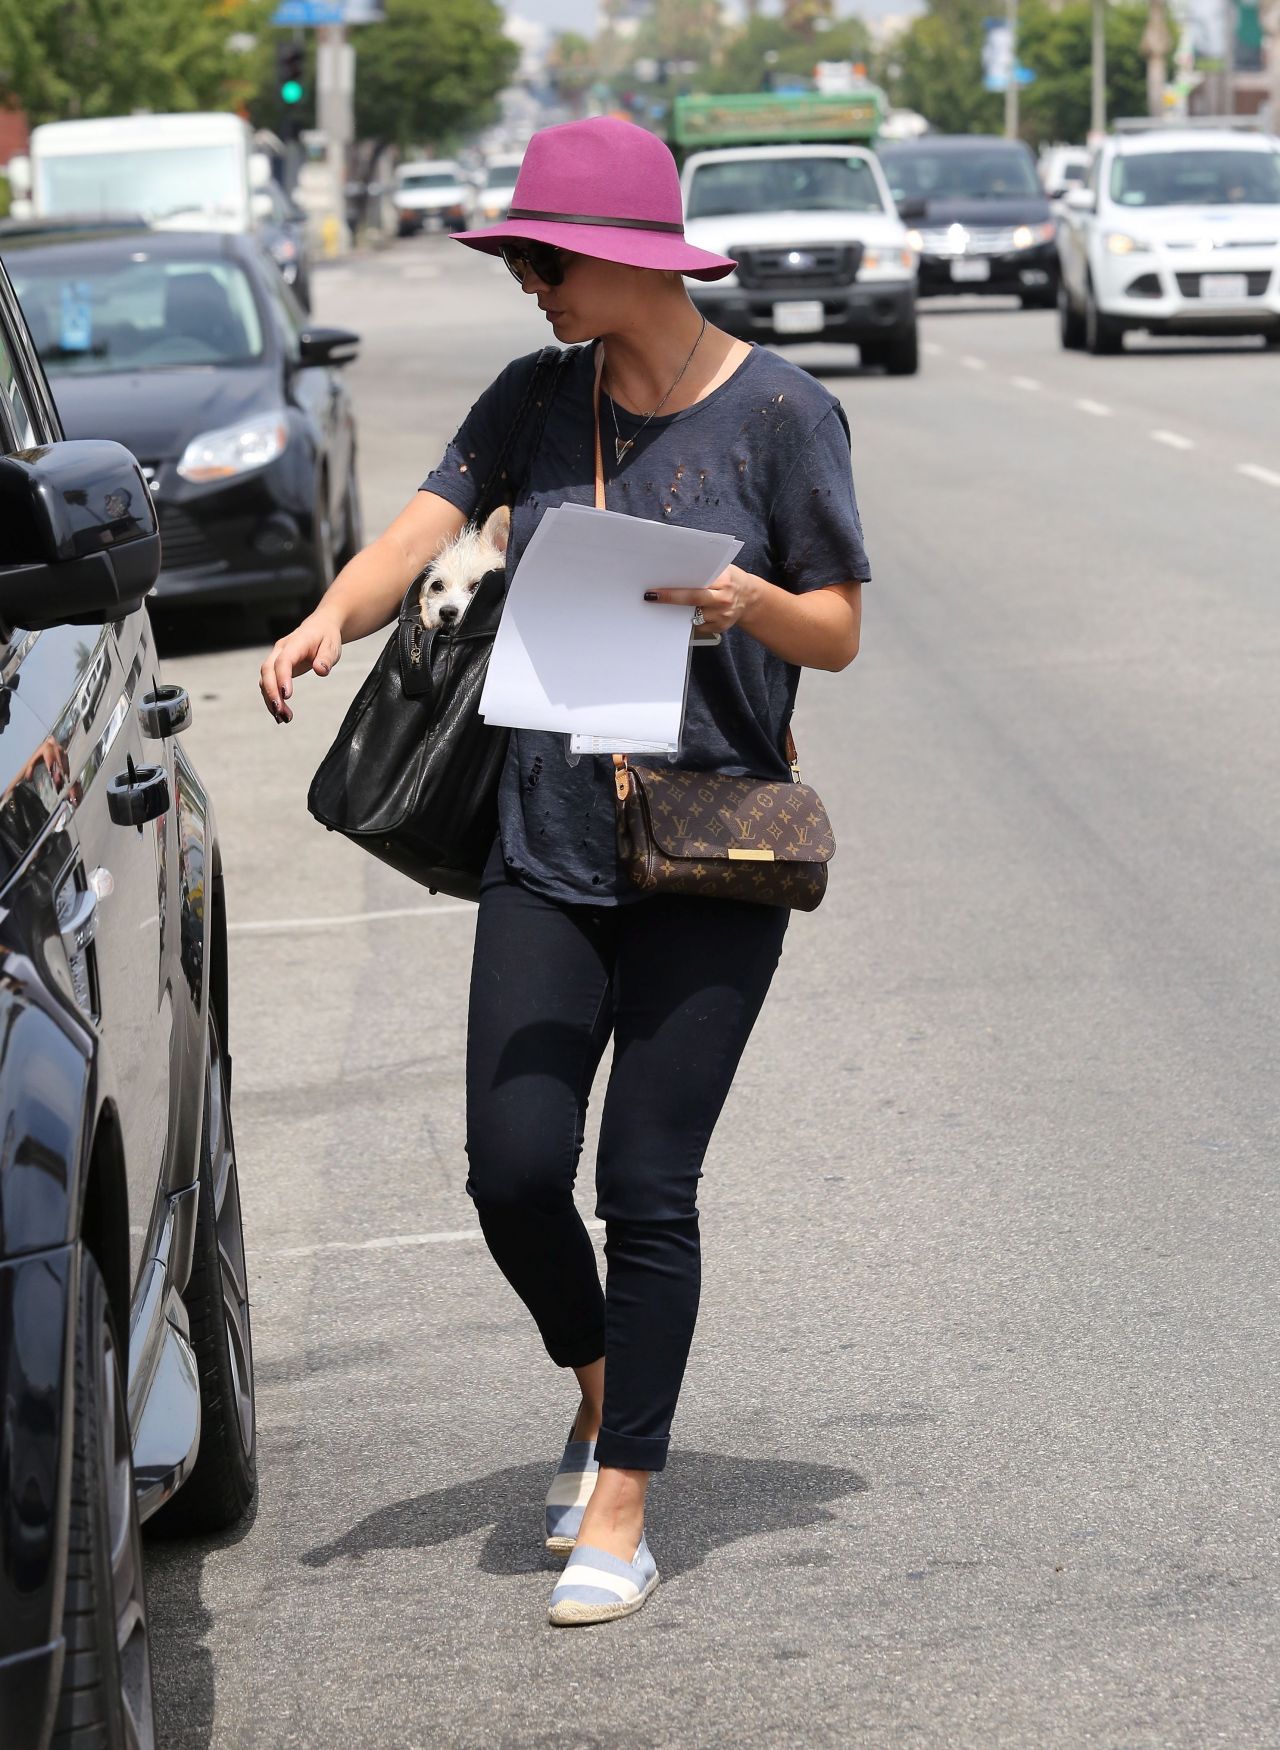 kaley-cuoco-in-jeans-out-in-la-june-2014_12.